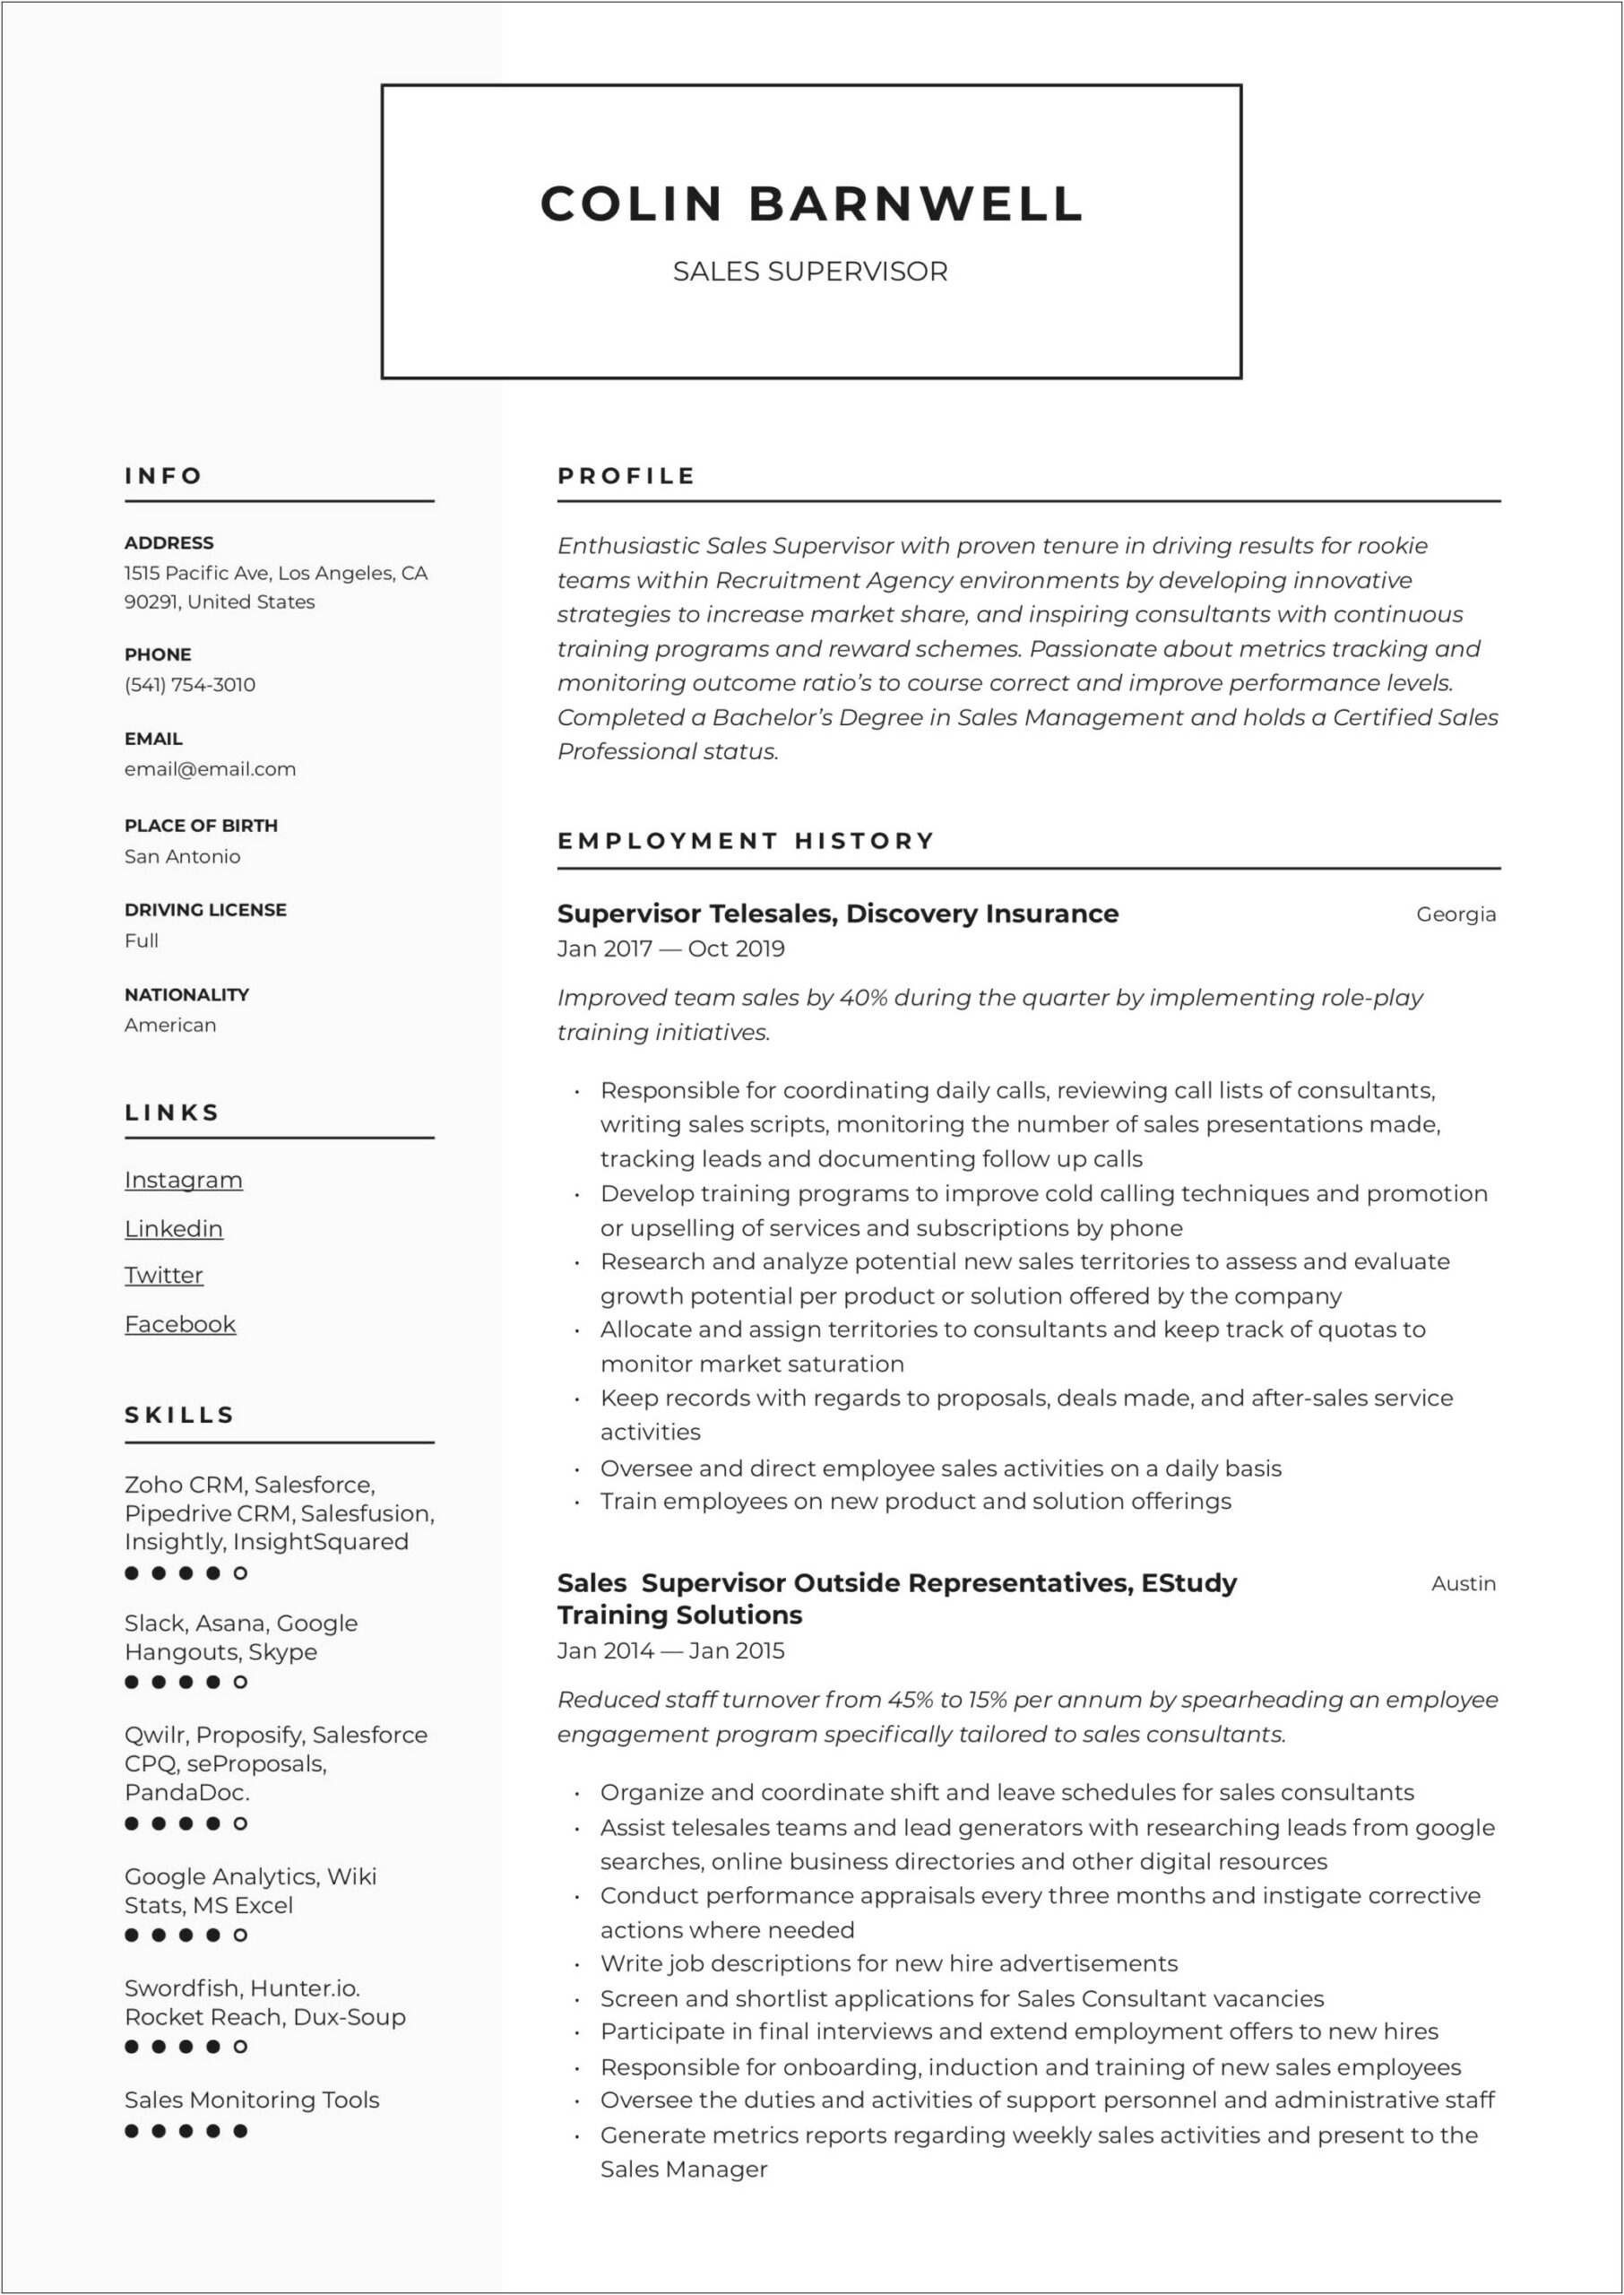 Working In Teams For Sales For Resume